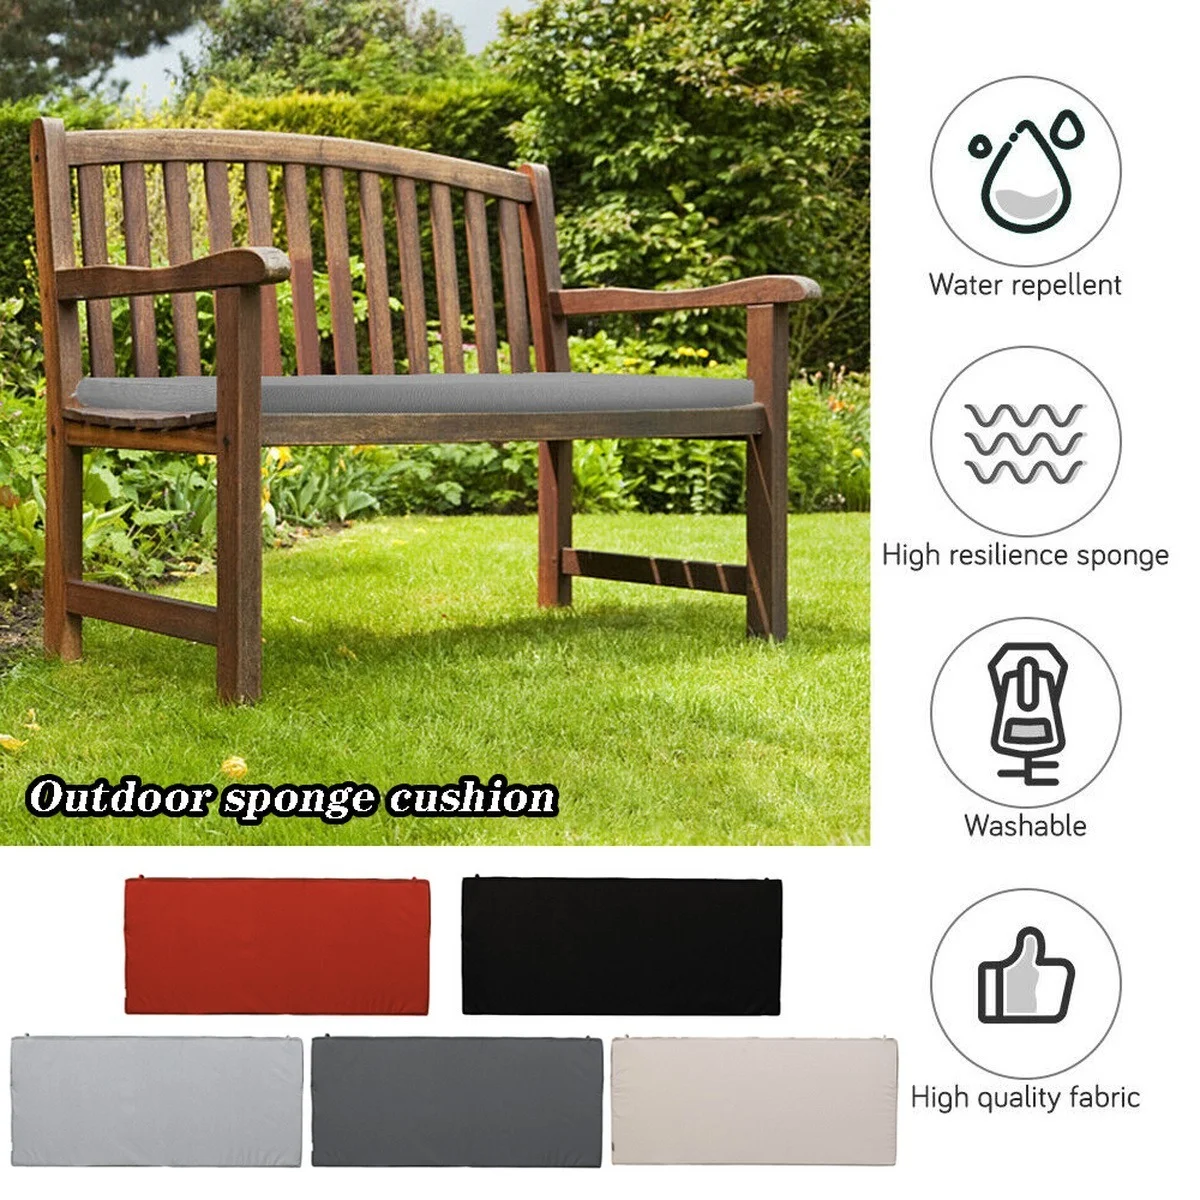 WATERPROOF Garden Bench Patio Pad SEAT PADS Chair Cushion Swing 2 Seater OUTDOOR 